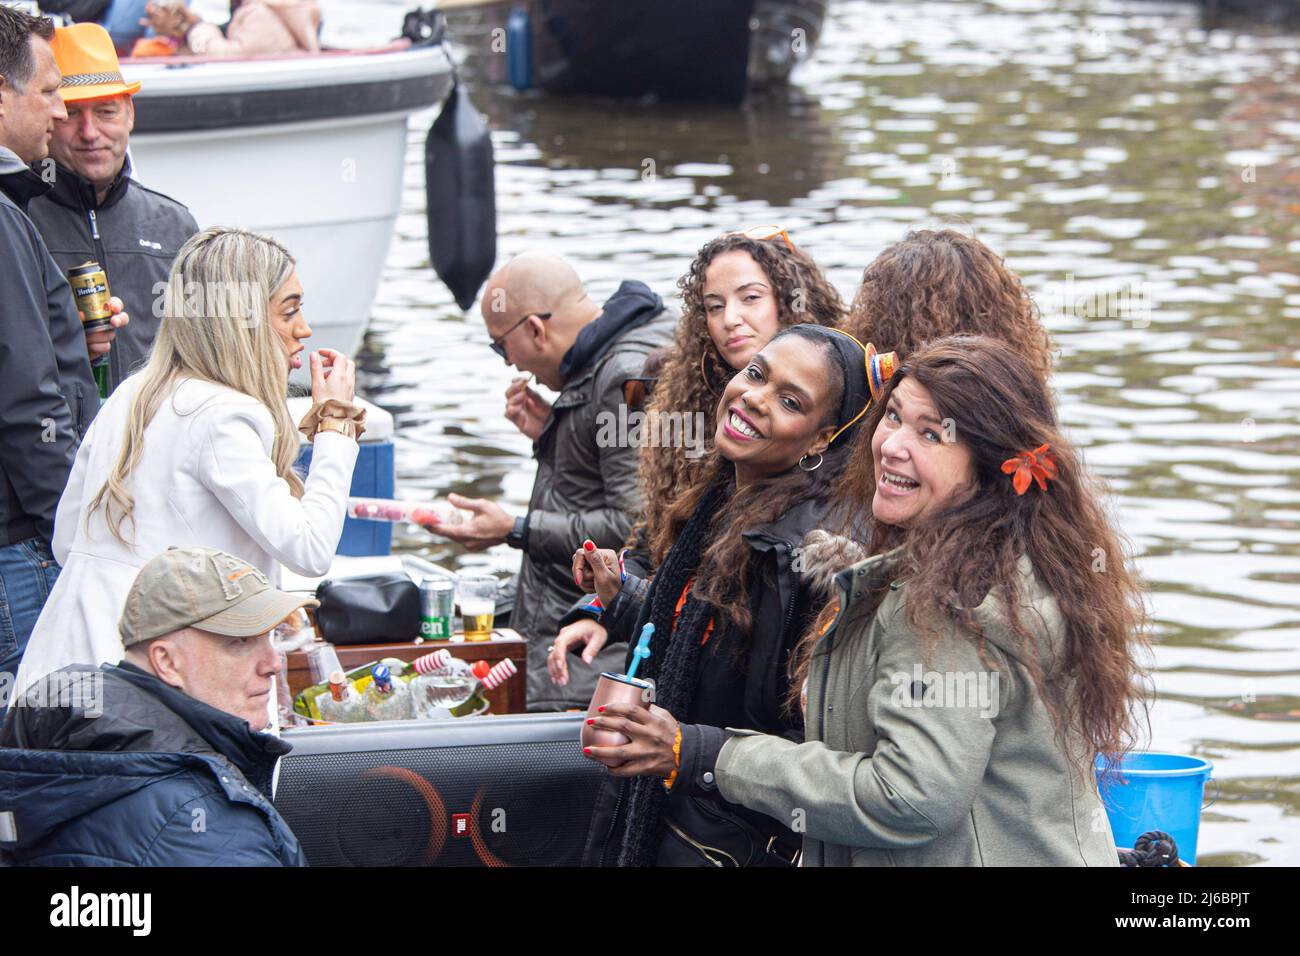 April 27, 2022, Amsterdam, Netherlands: People seen on a boat in the canals of Amsterdam during the King's Day celebration. King's Day known as Koningsdag is an orange filled celebration for the king's birthday, a national holiday full of events across the country. Thousands of local revellers and tourists visited Amsterdam to celebrate and party around the canals while wearing orange clothes and the boats doing a parade in the water canals. (Credit Image: © Nik Oiko/SOPA Images via ZUMA Press Wire) Stock Photo